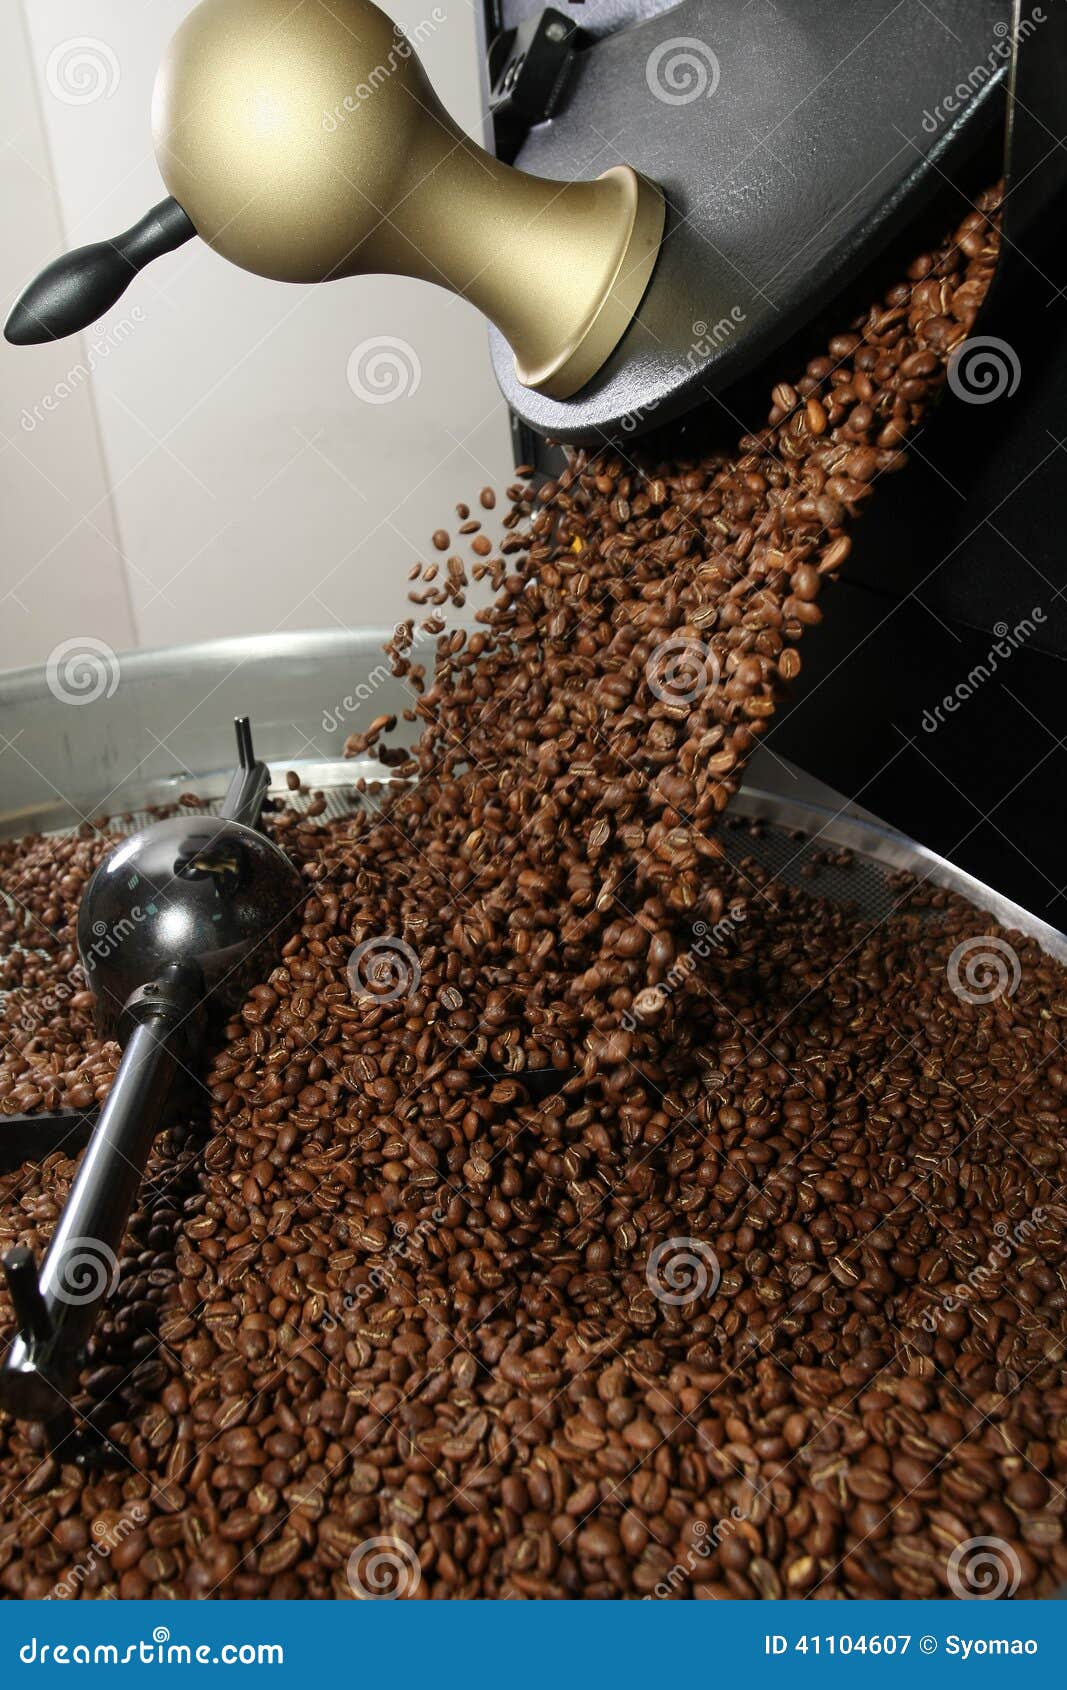 https://thumbs.dreamstime.com/z/freshly-roasted-coffee-beans-spilled-out-roasting-machines-41104607.jpg